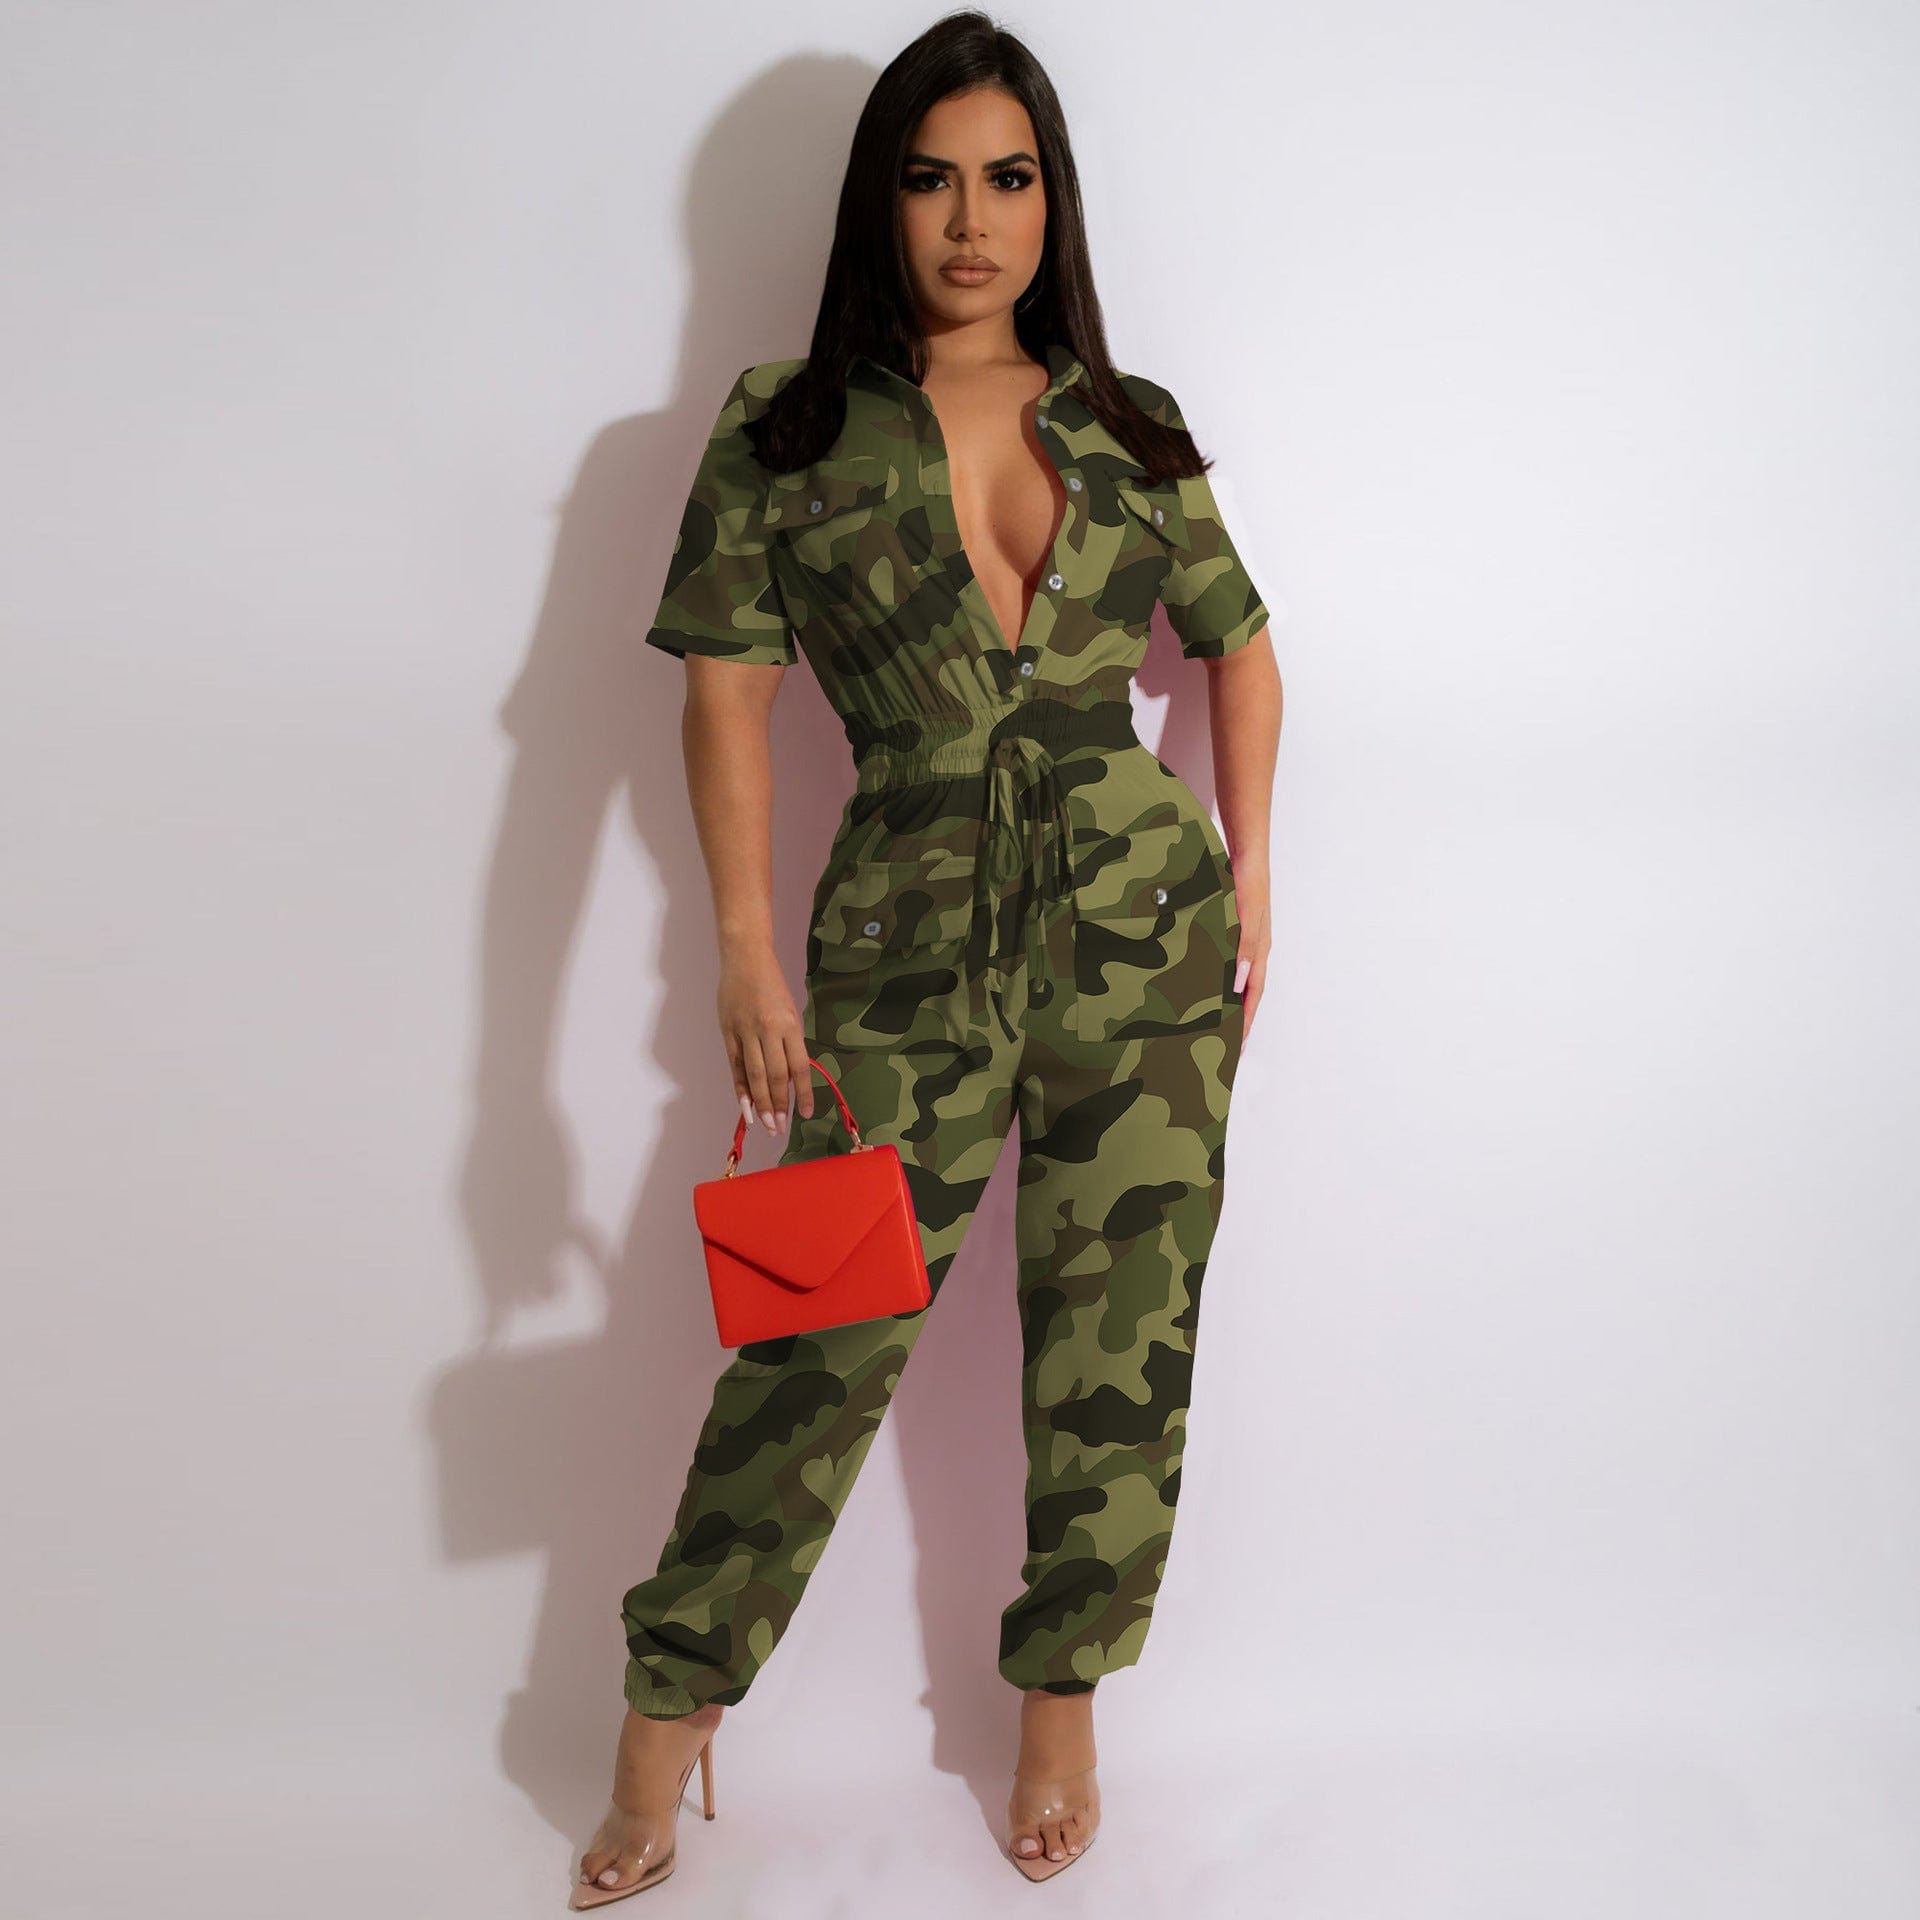 Alpha C Women Camouflage High Stretch V Neck  Overall Jumpsuit jumpsuit Aiexpress Green camouflage / XL